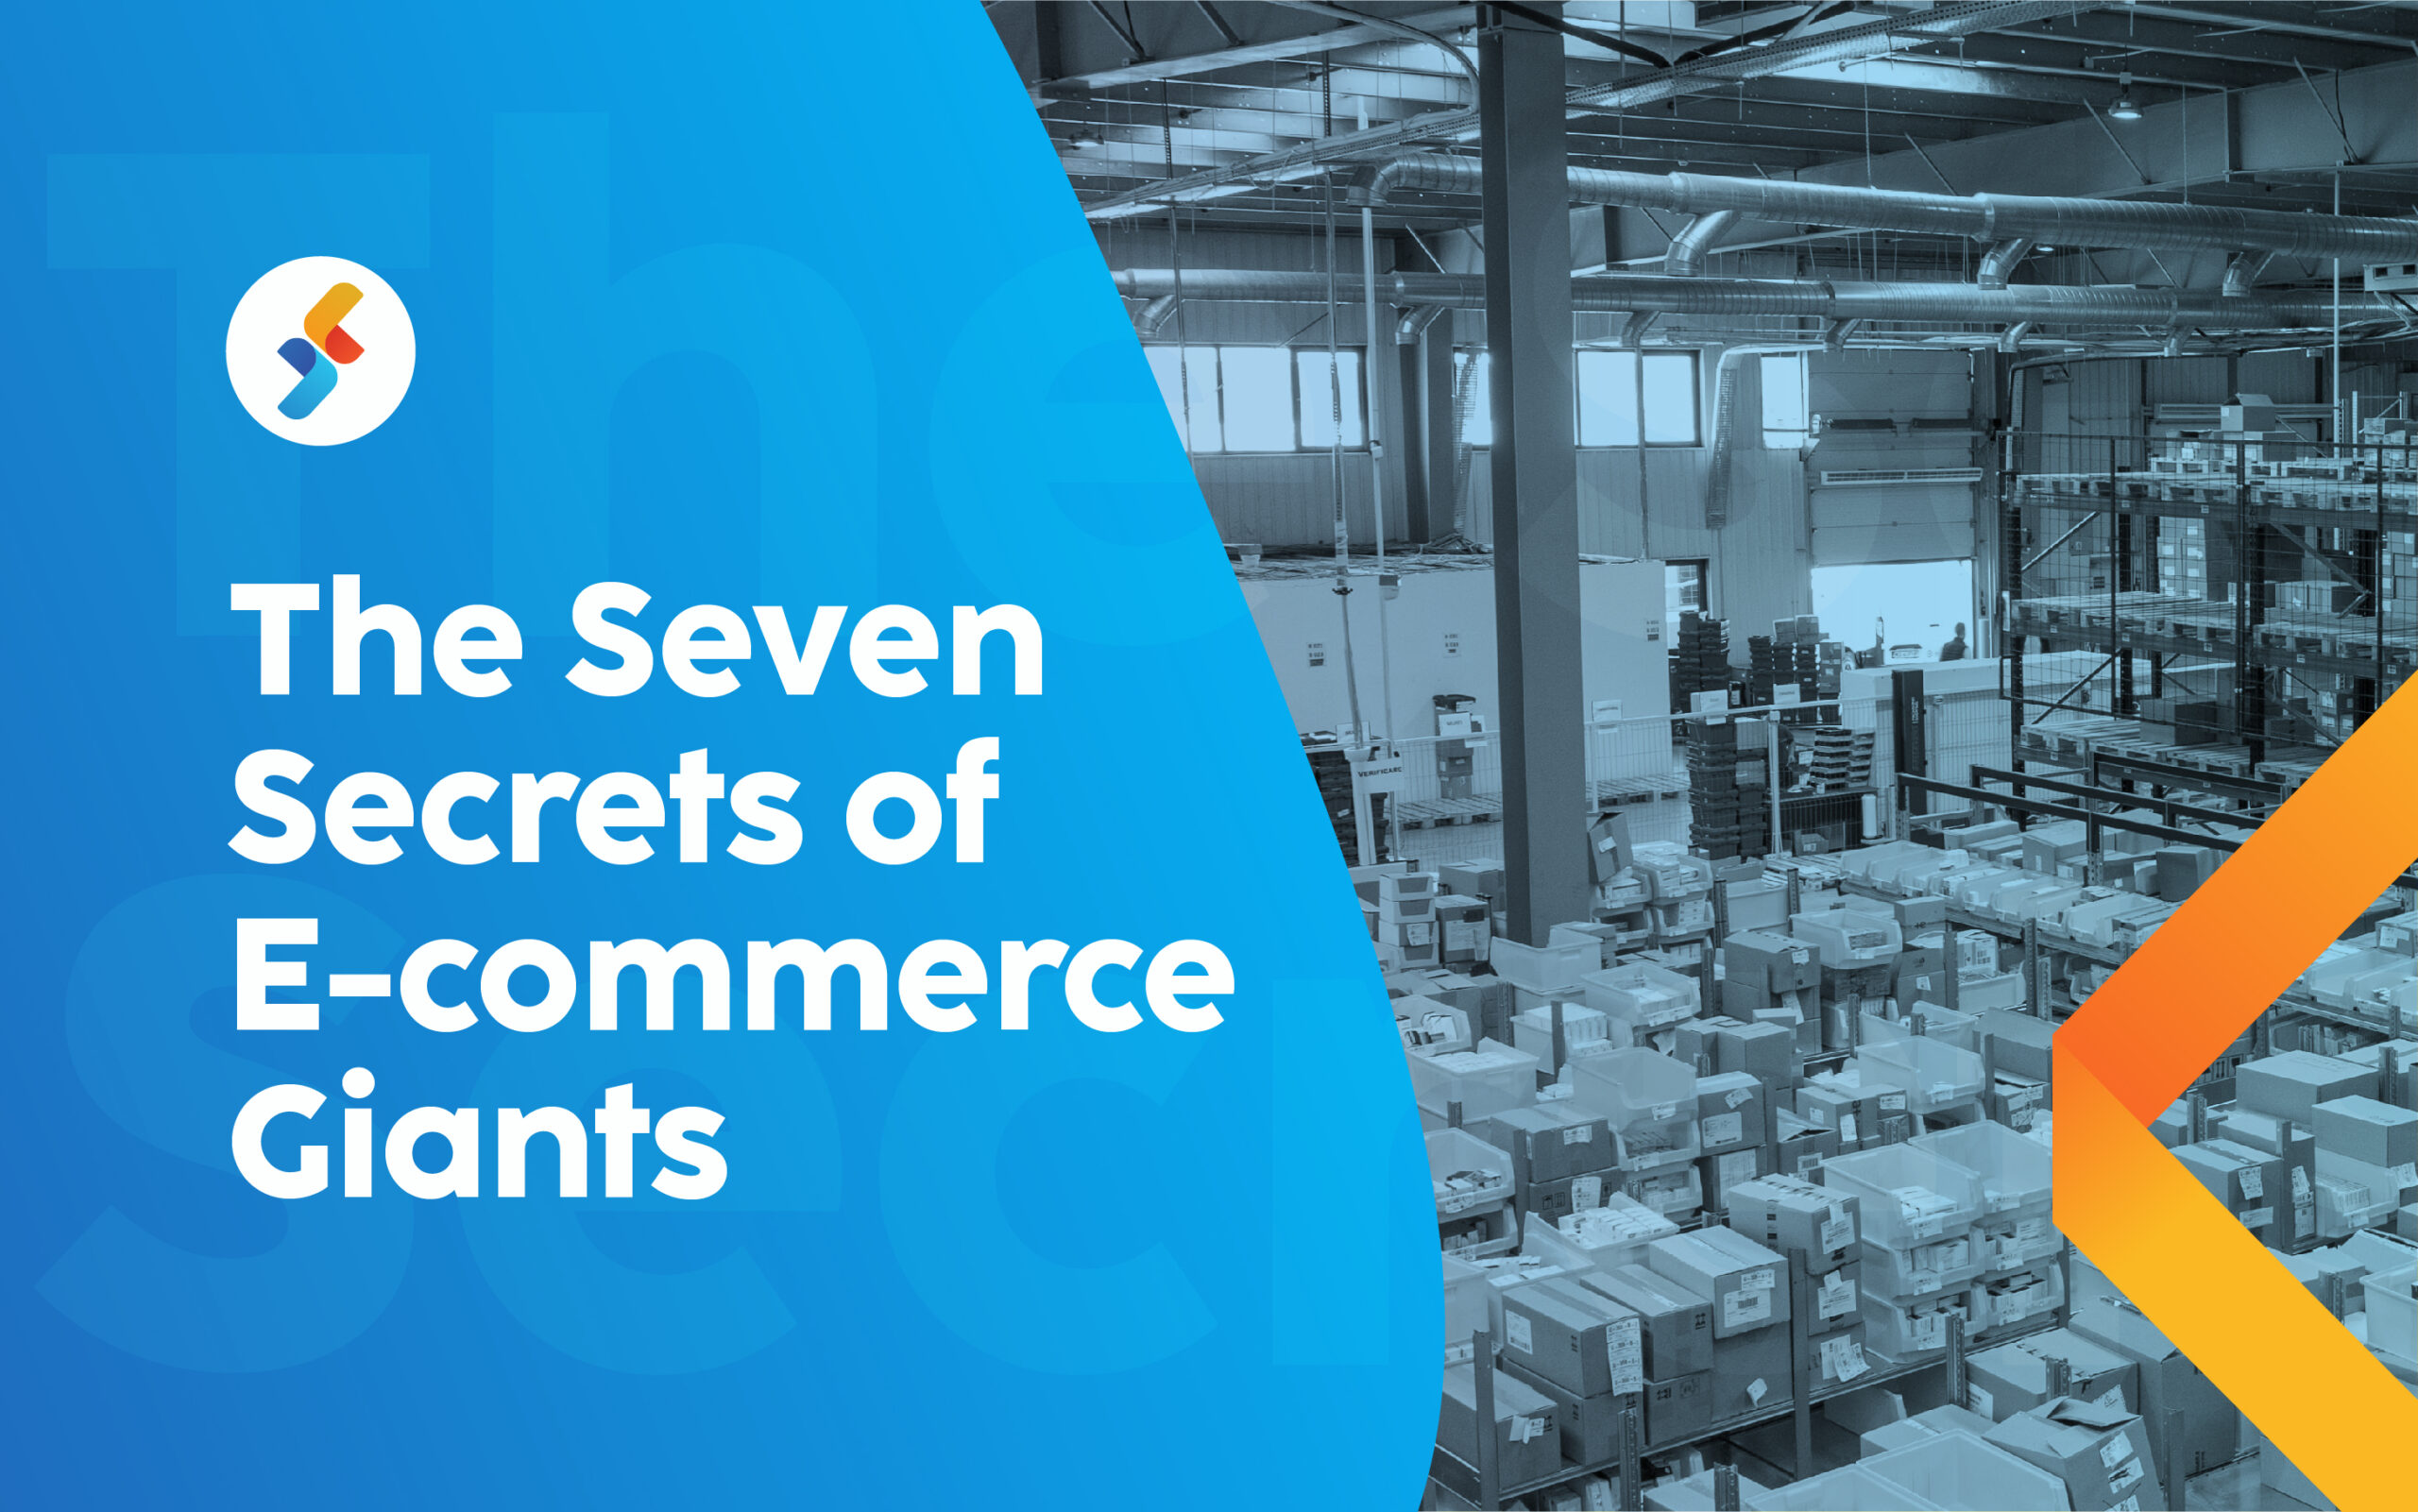 The 7 Secrets of E-commerce Giants – And What Can You Learn From Them?